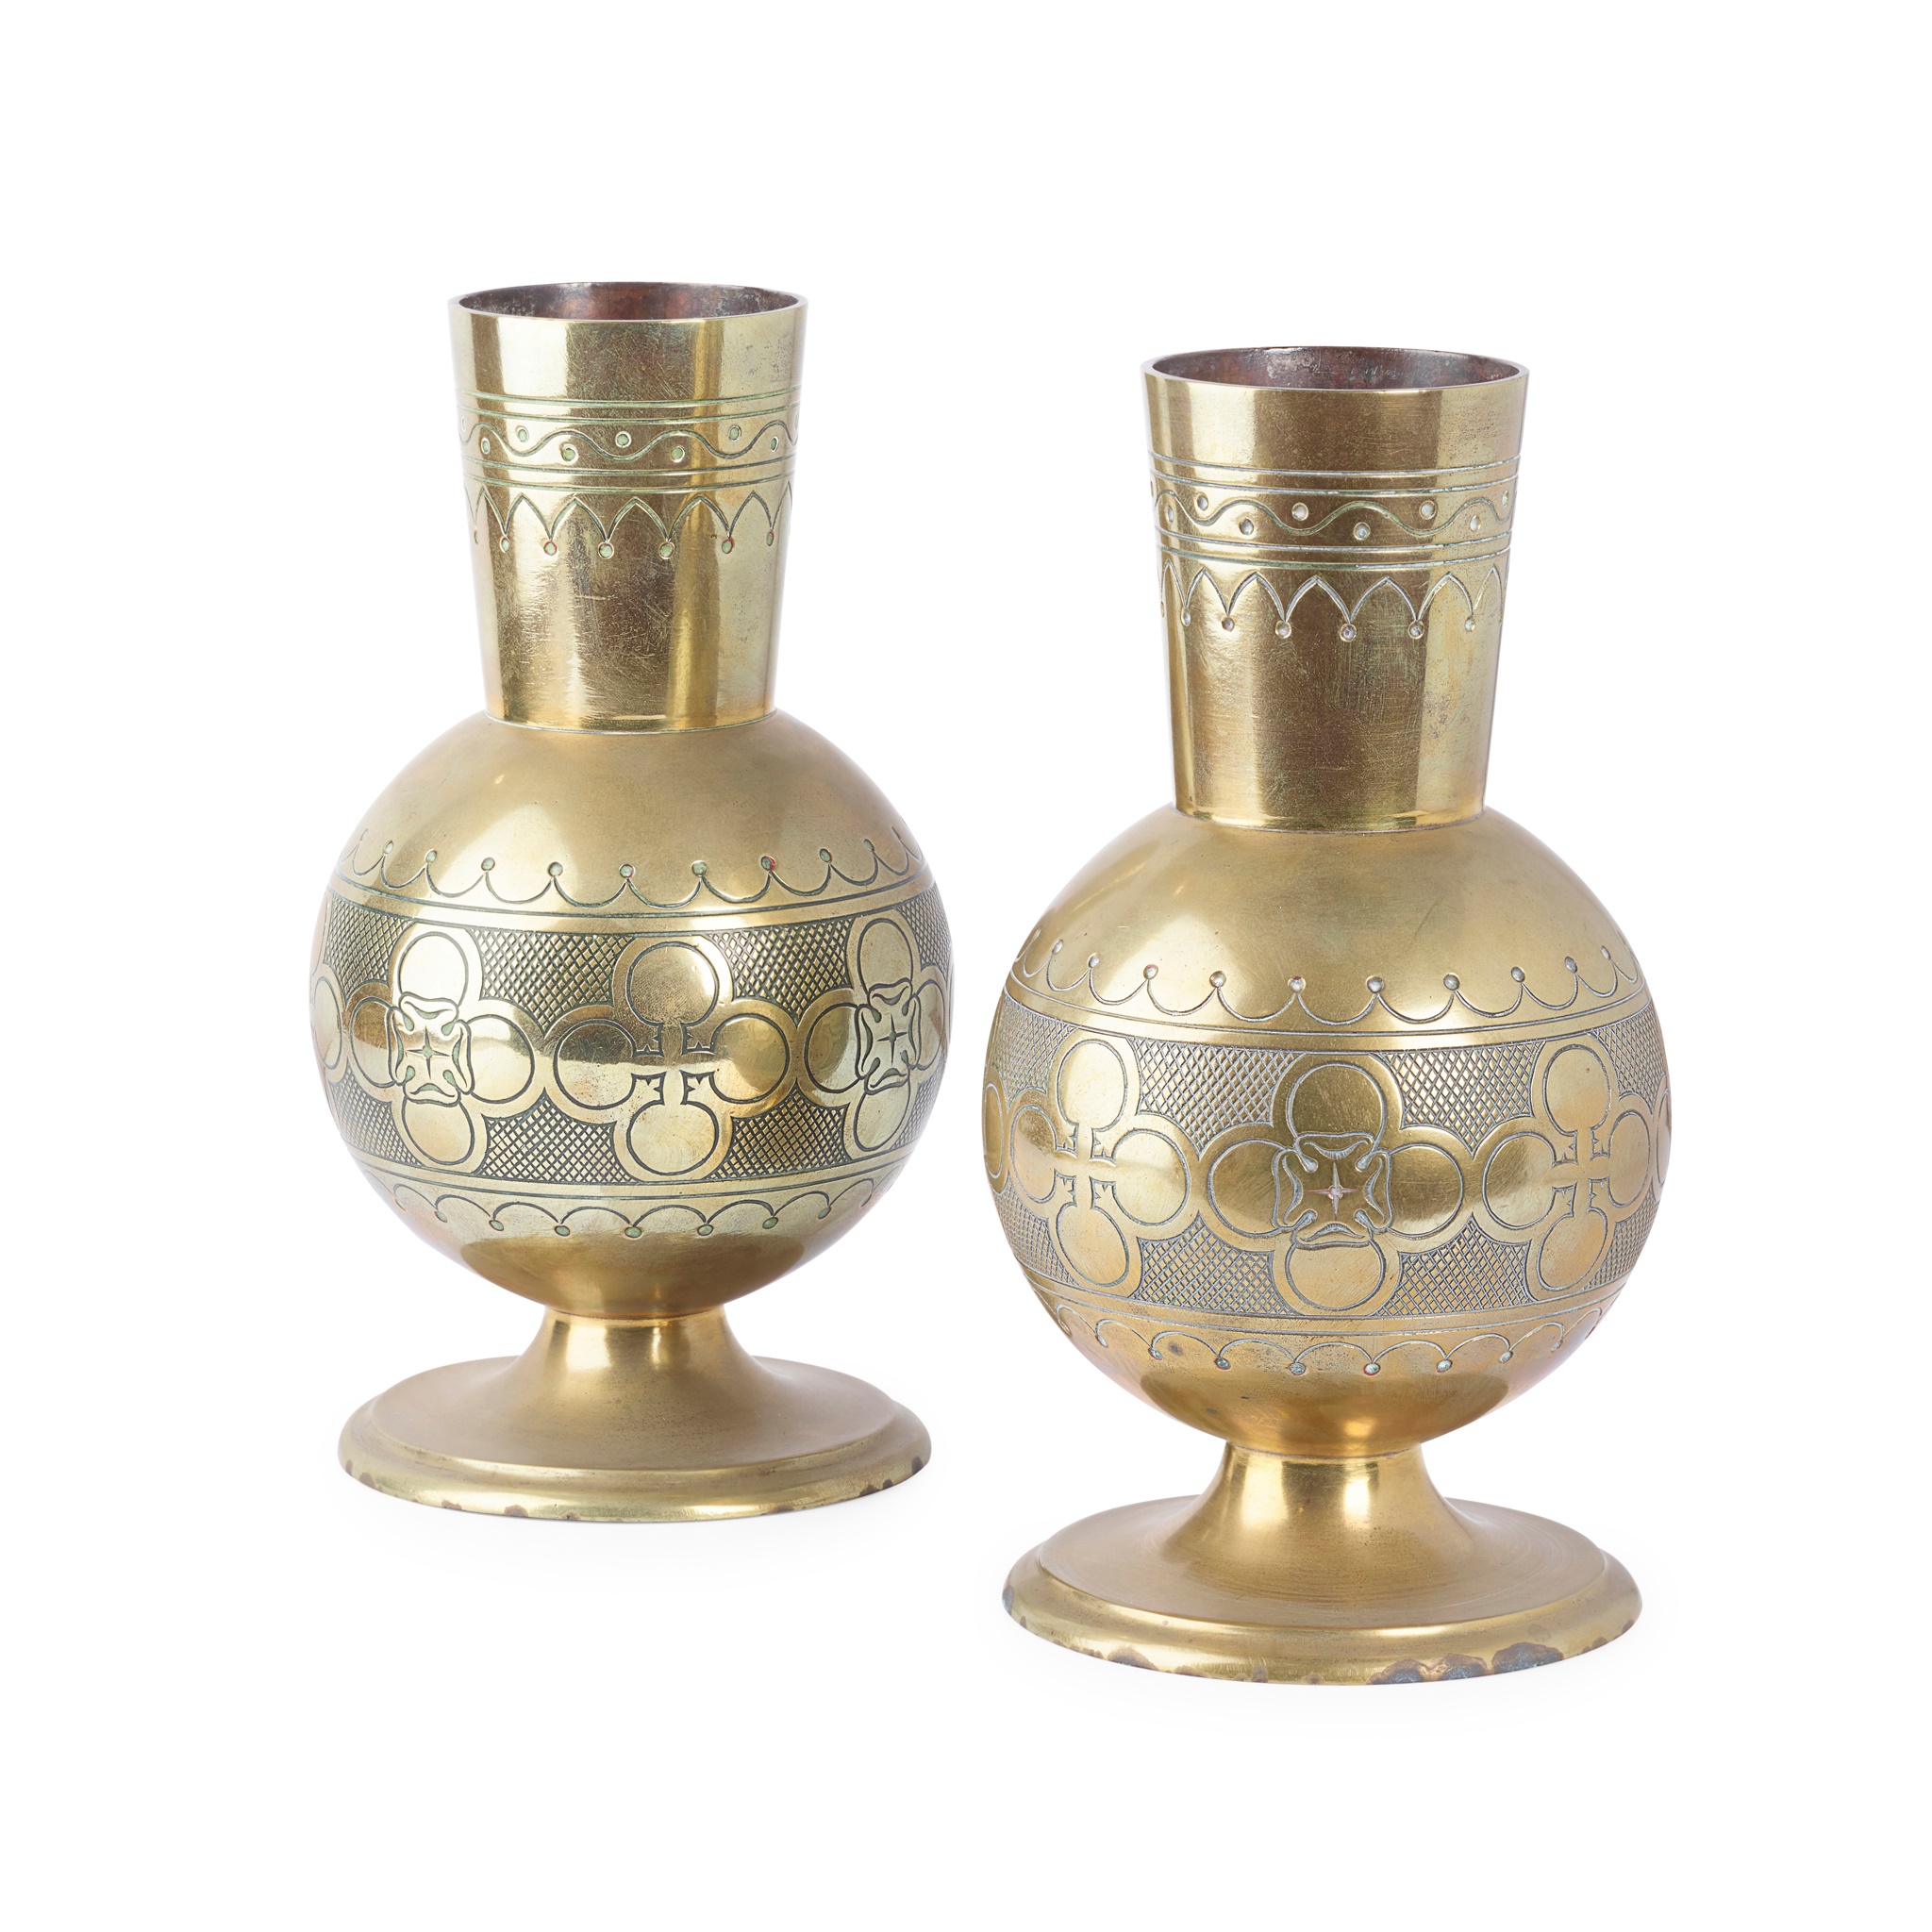 COX & SONS, LONDON PAIR OF AESTHETIC MOVEMENT VASES, CIRCA 1880 - Image 3 of 3